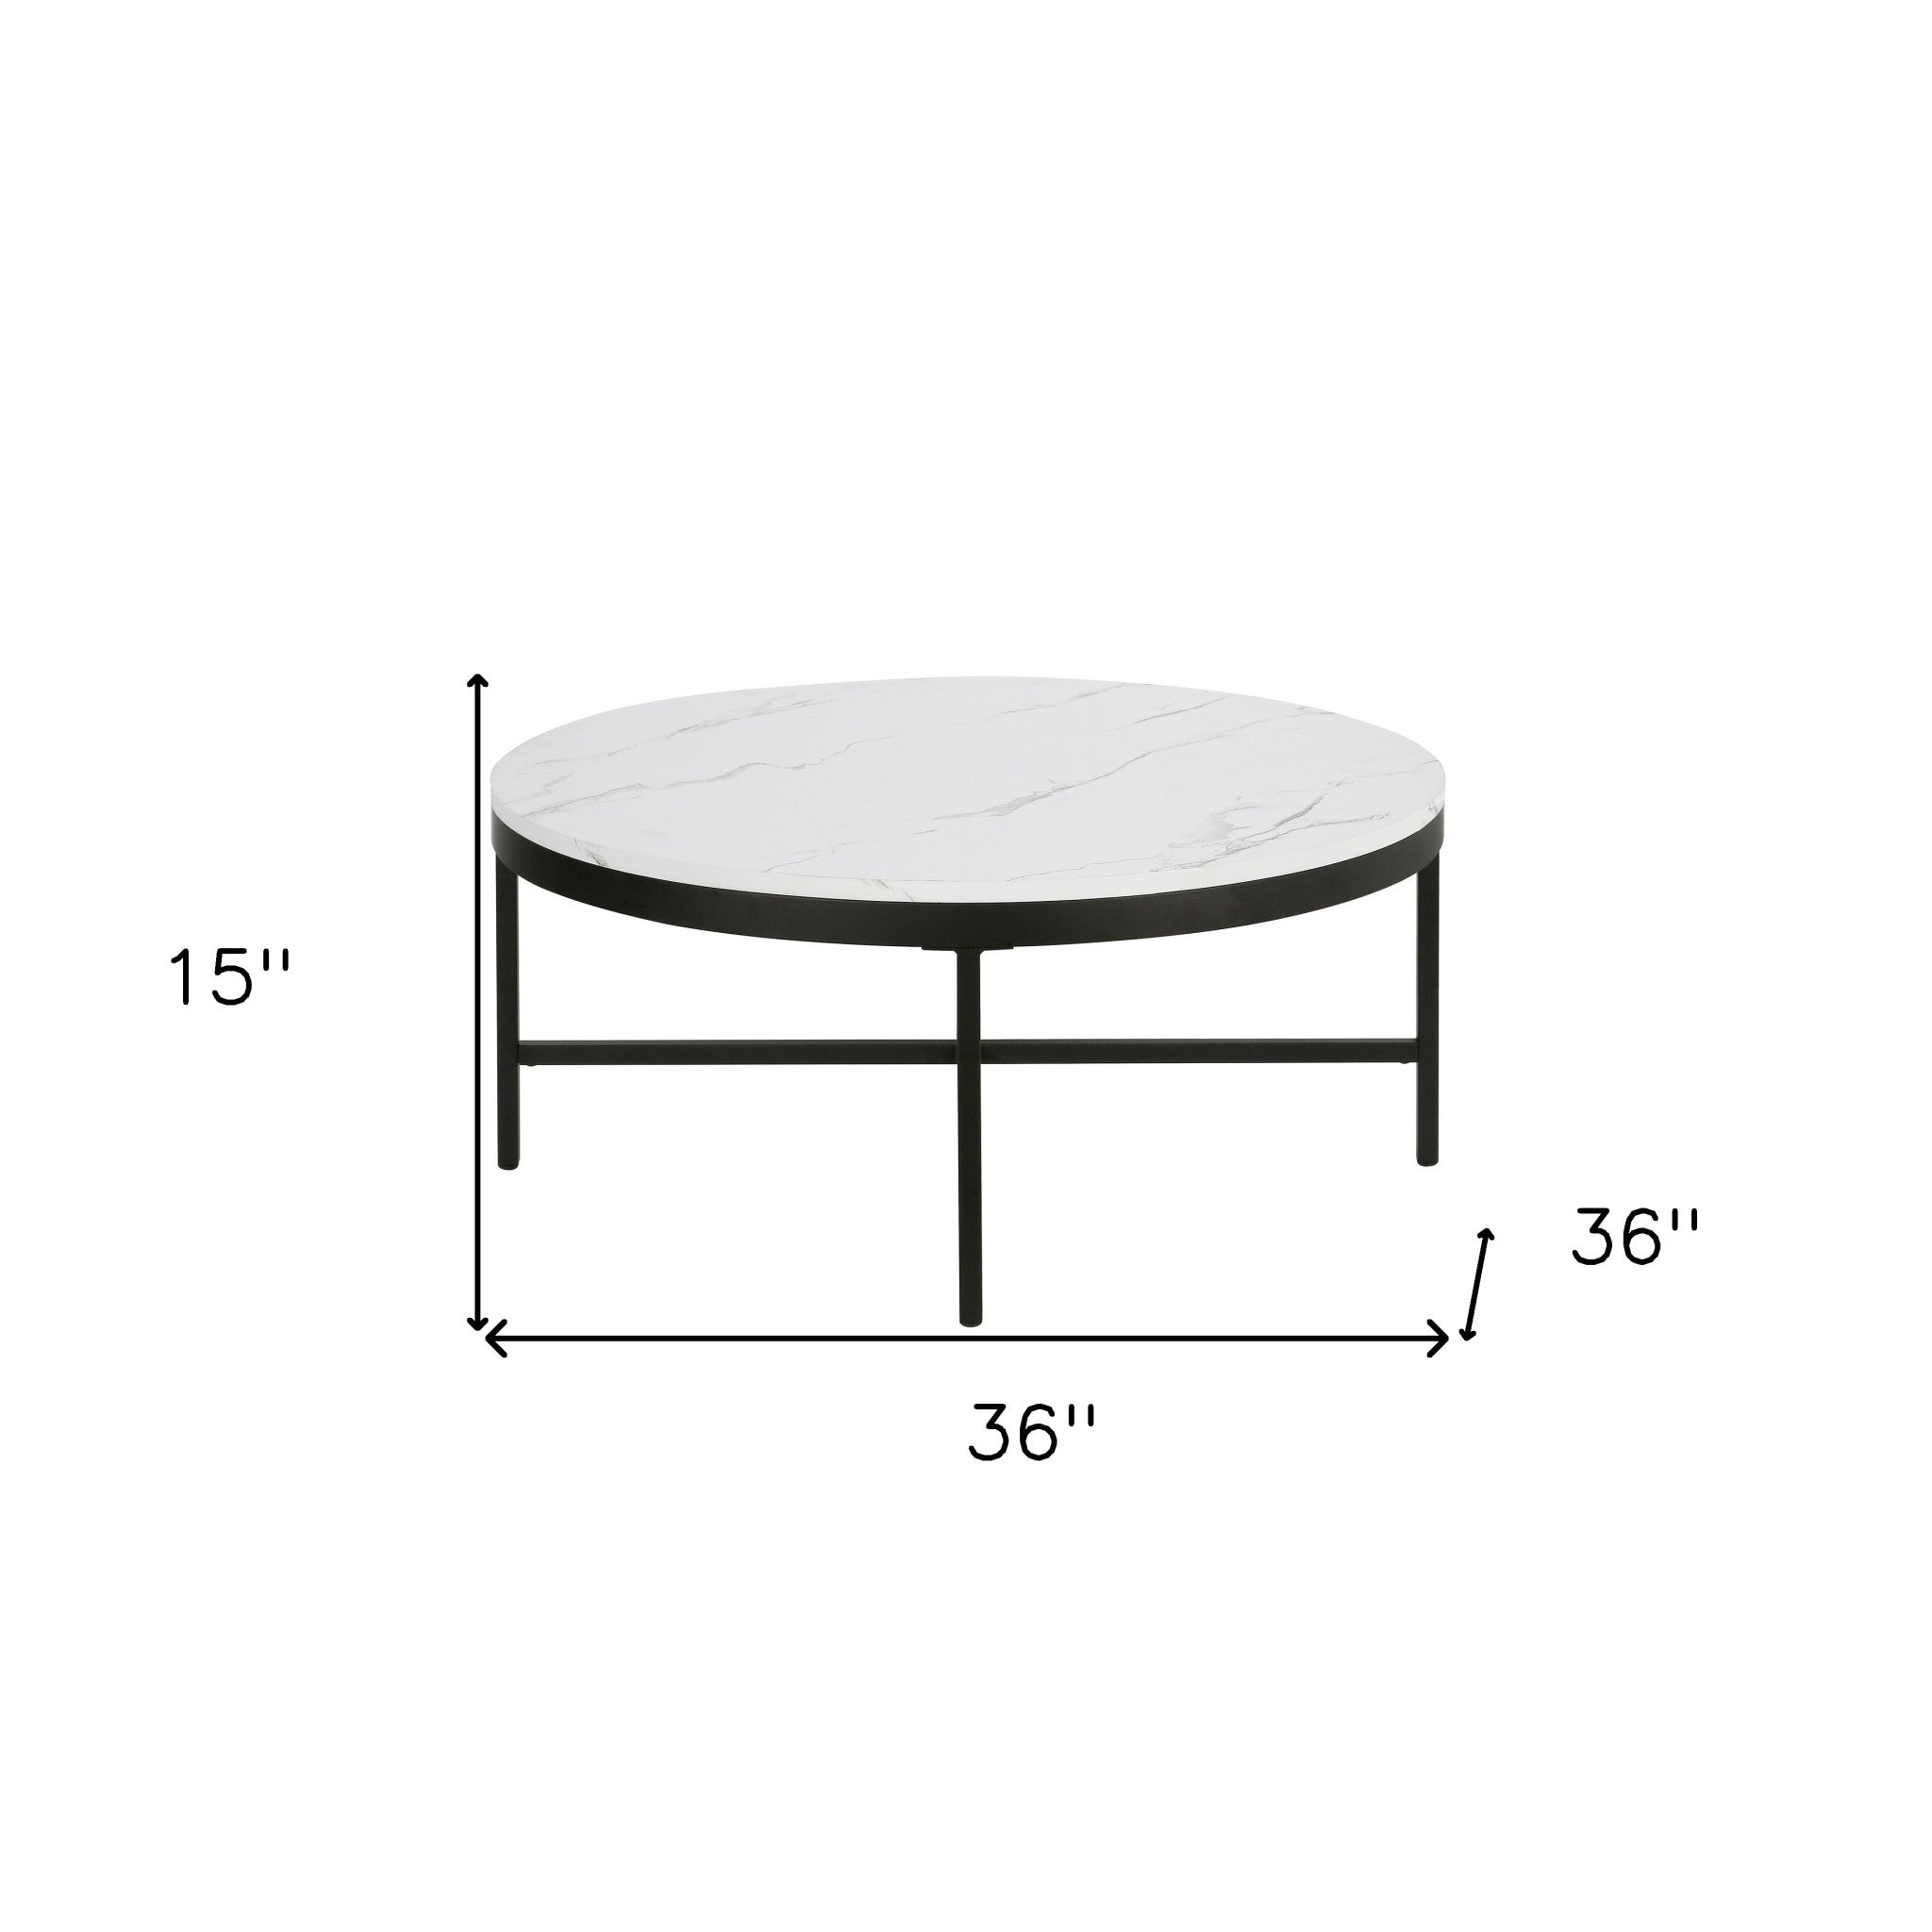 36" White And Black Faux Marble And Steel Round Coffee Table